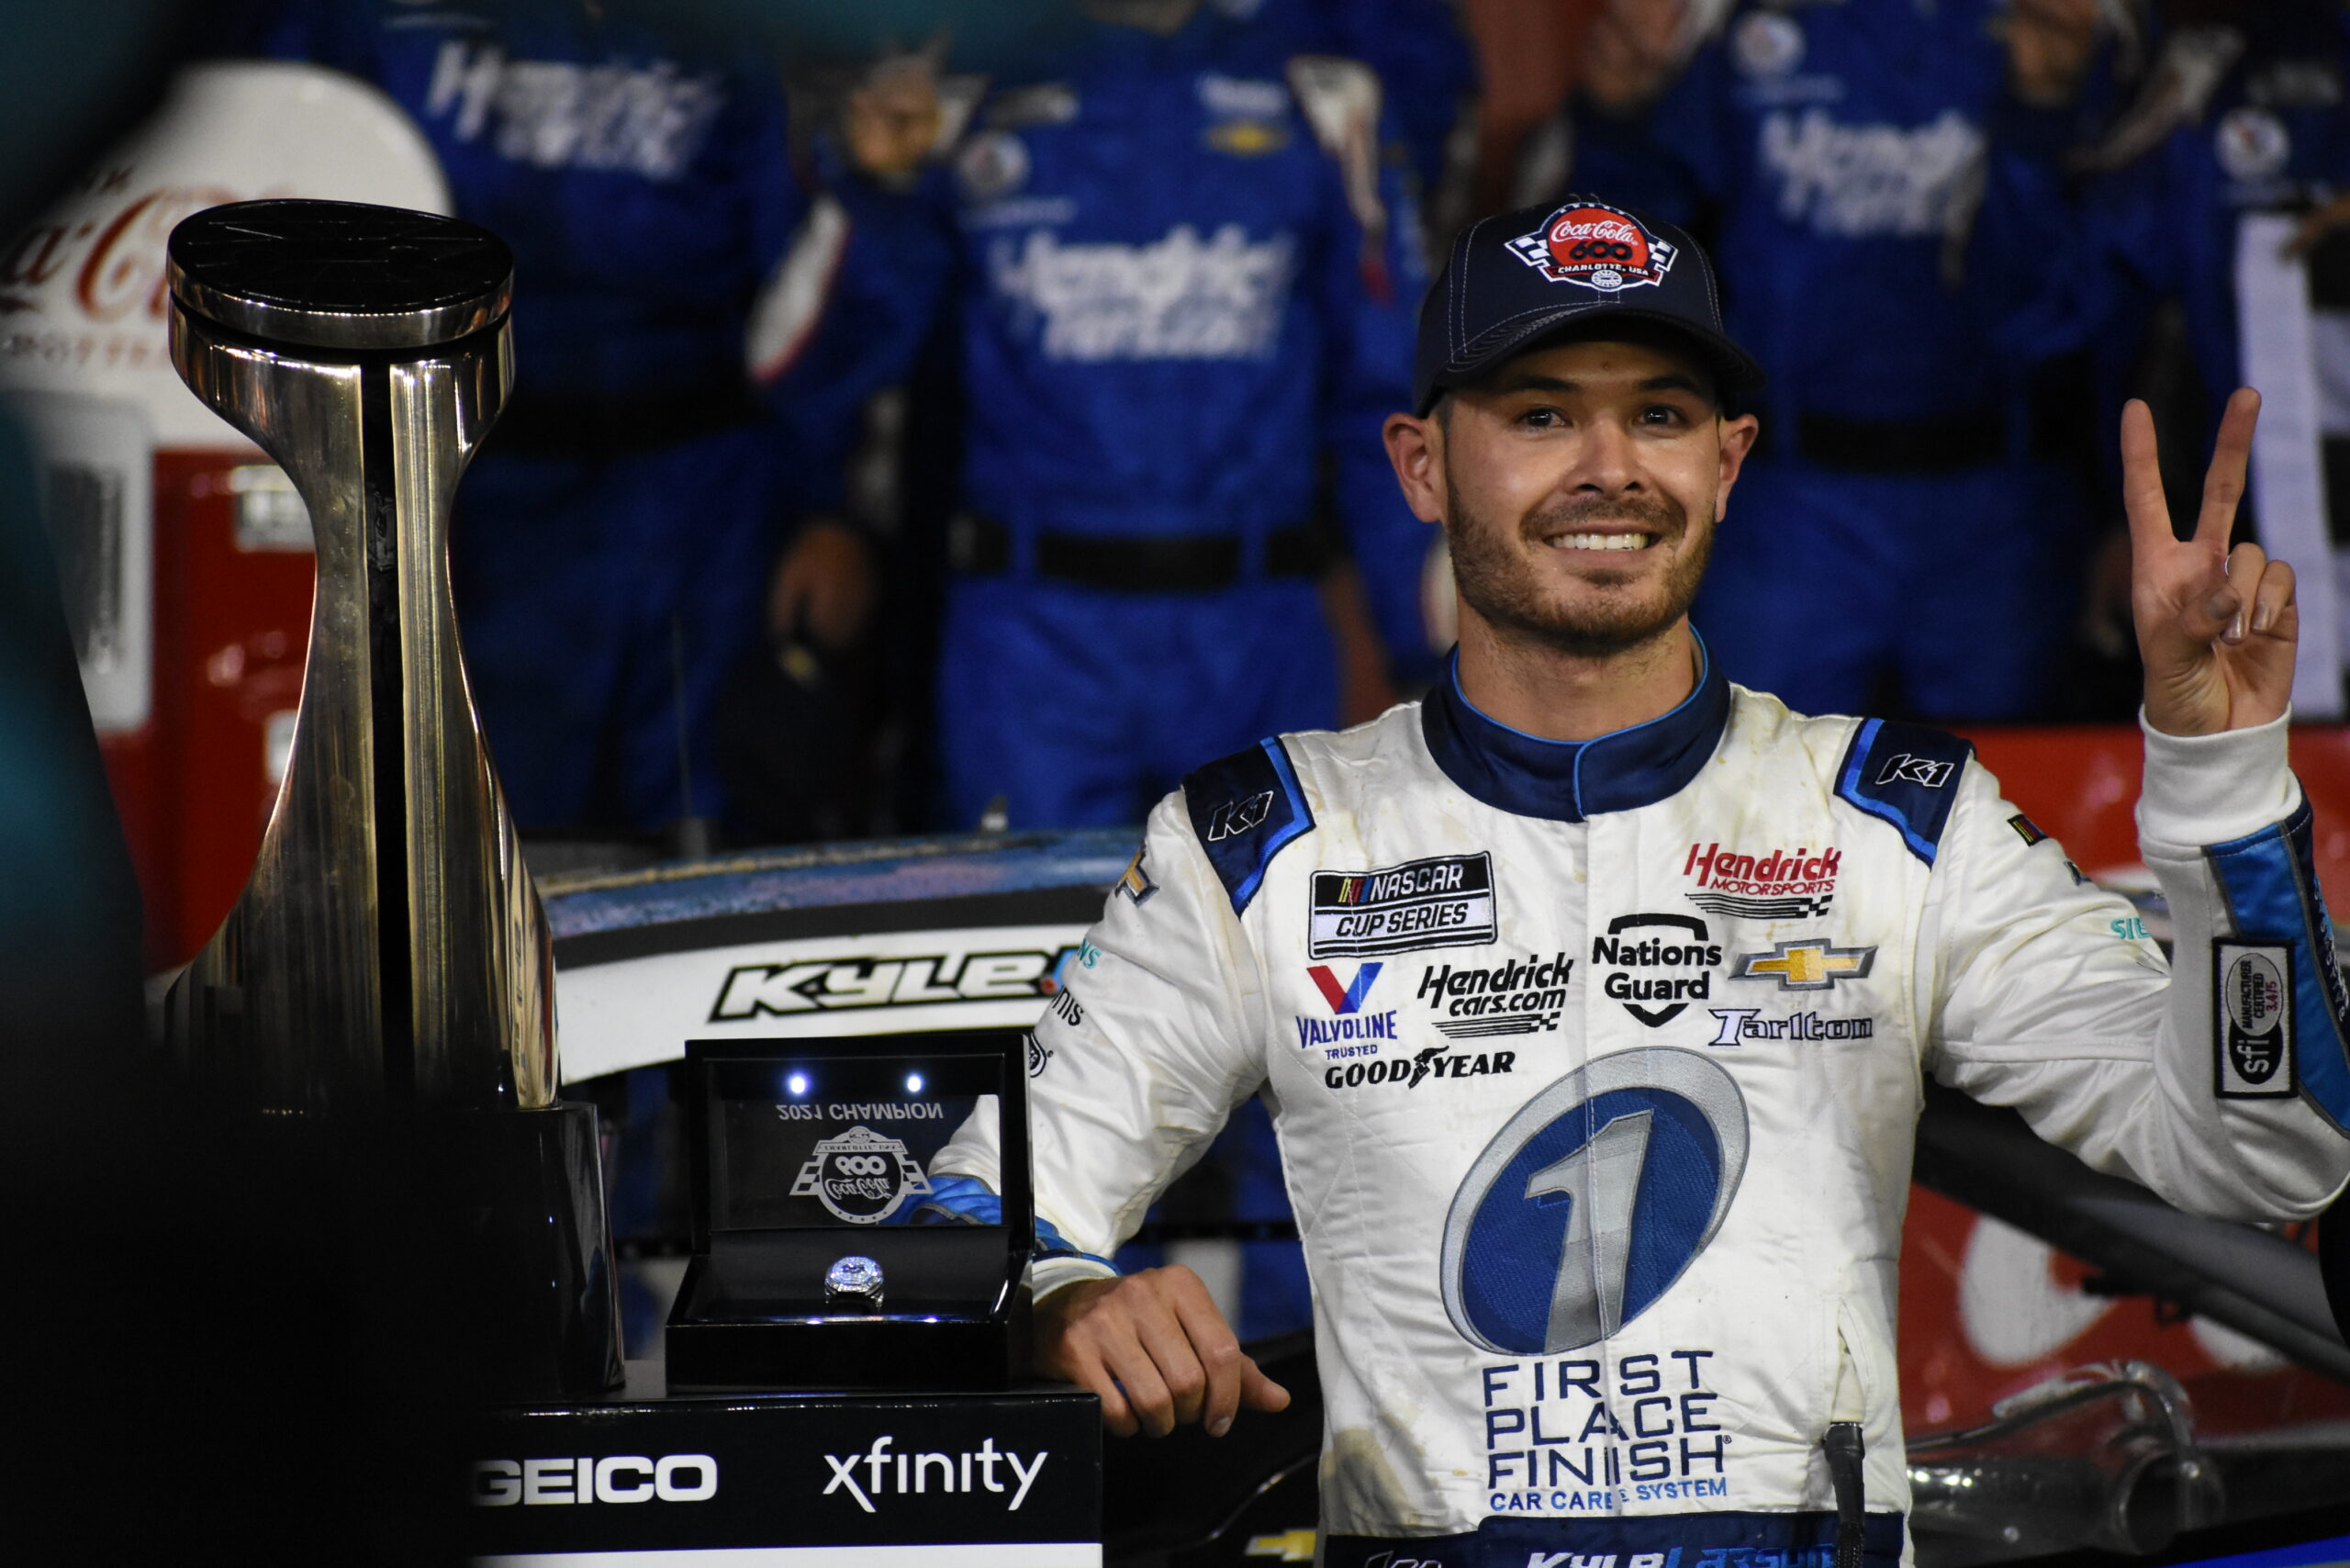 At last, Kyle Larson caps off a dominant performance by winning the Coca-Cola 600 at Charlotte. (Photo: Michael Guariglia/The Podium Finish)